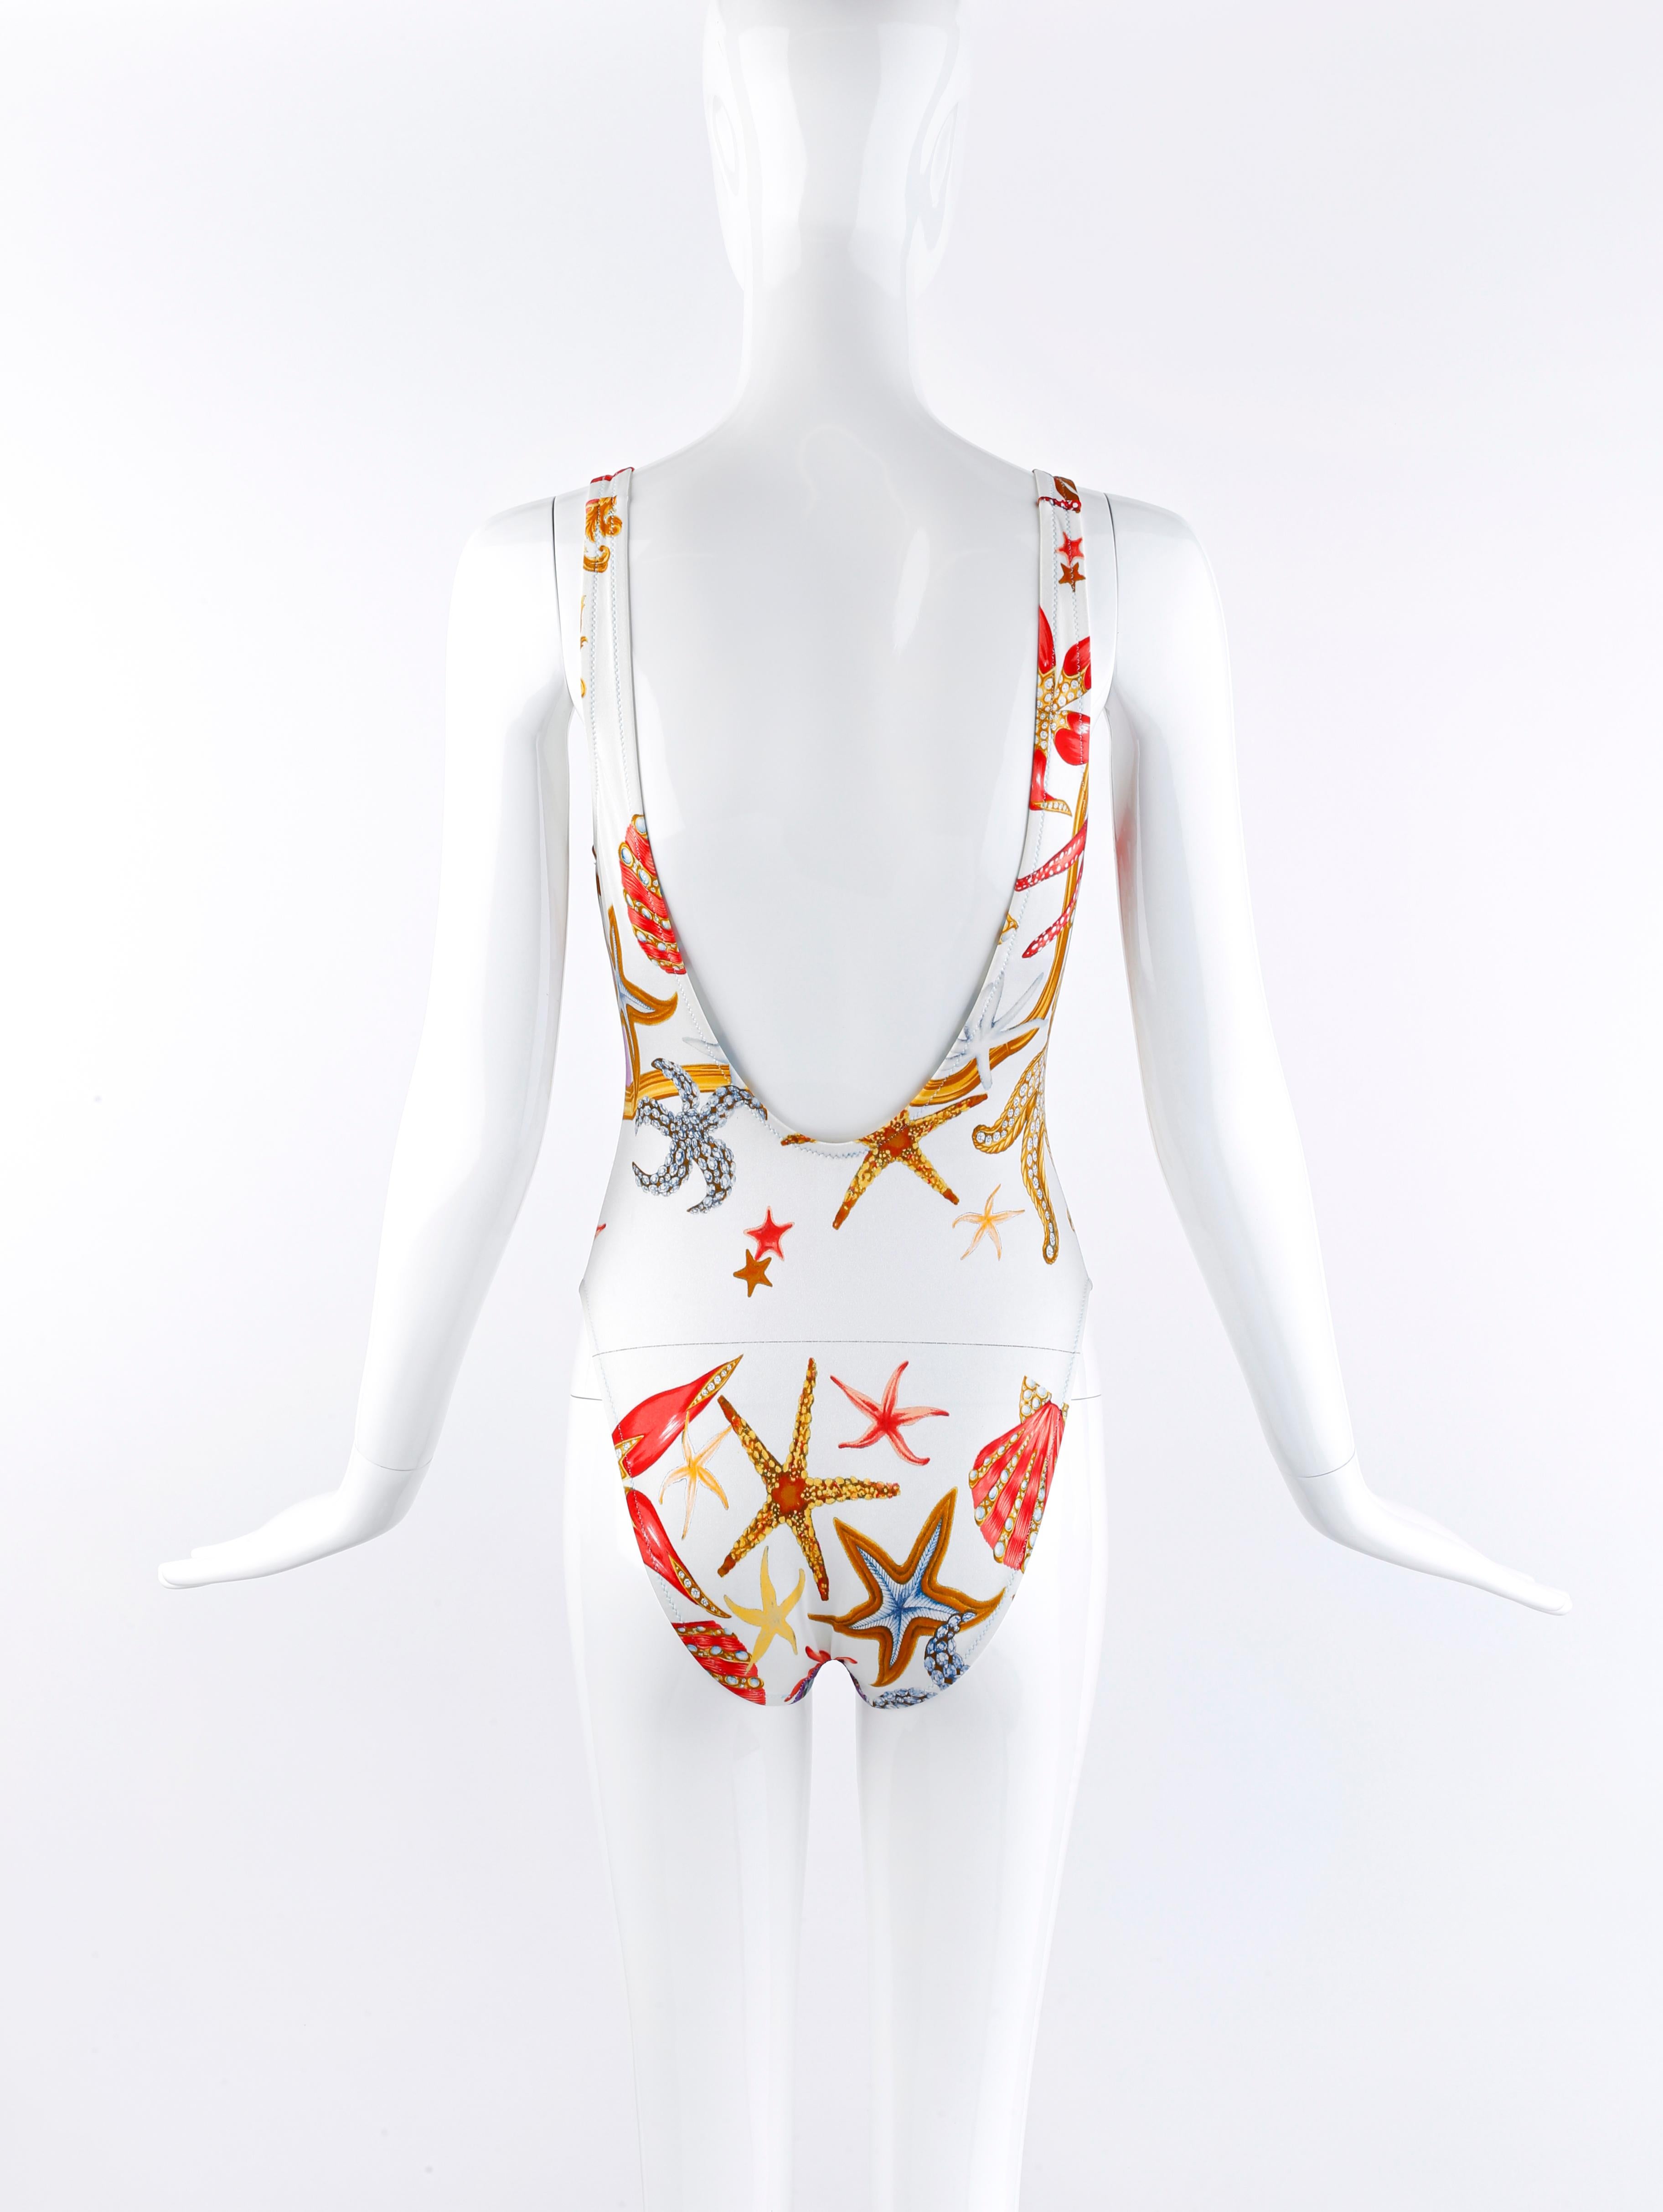 Gianni Versace S/S 1992 Starfish Seashell Print Plunge Back Swimsuit Bodysuit In Good Condition For Sale In Chicago, IL